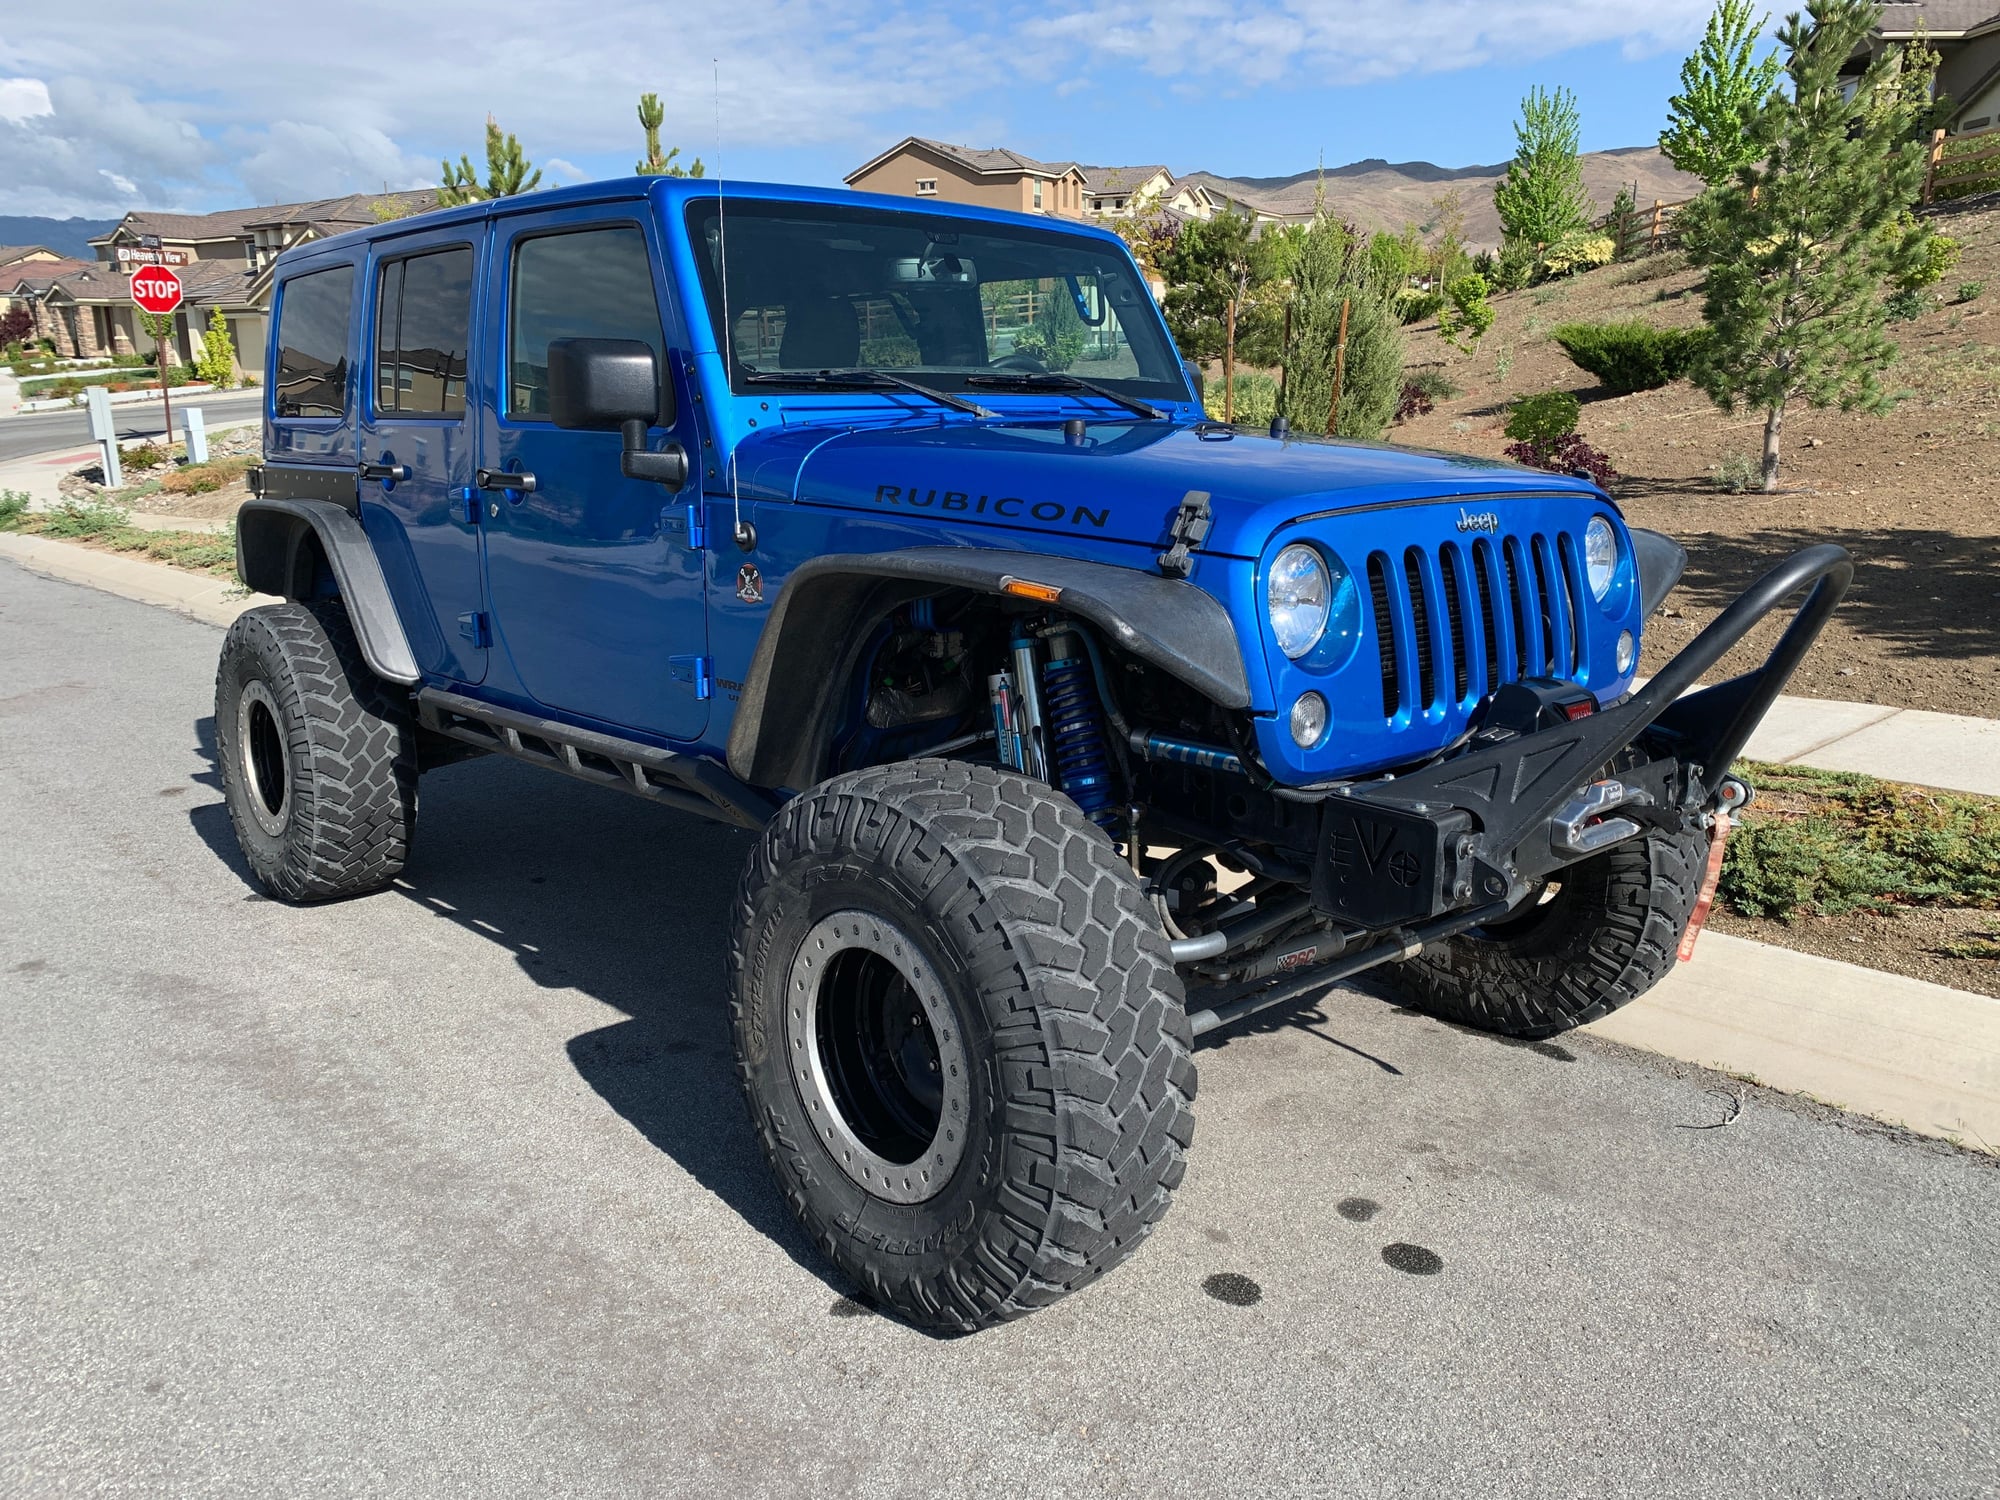 16 Wrangler Unlimited Rubicon 4x4 In Sky Blue For Sale Jk Forum Com The Top Destination For Jeep Jk And Jl Wrangler News Rumors And Discussion